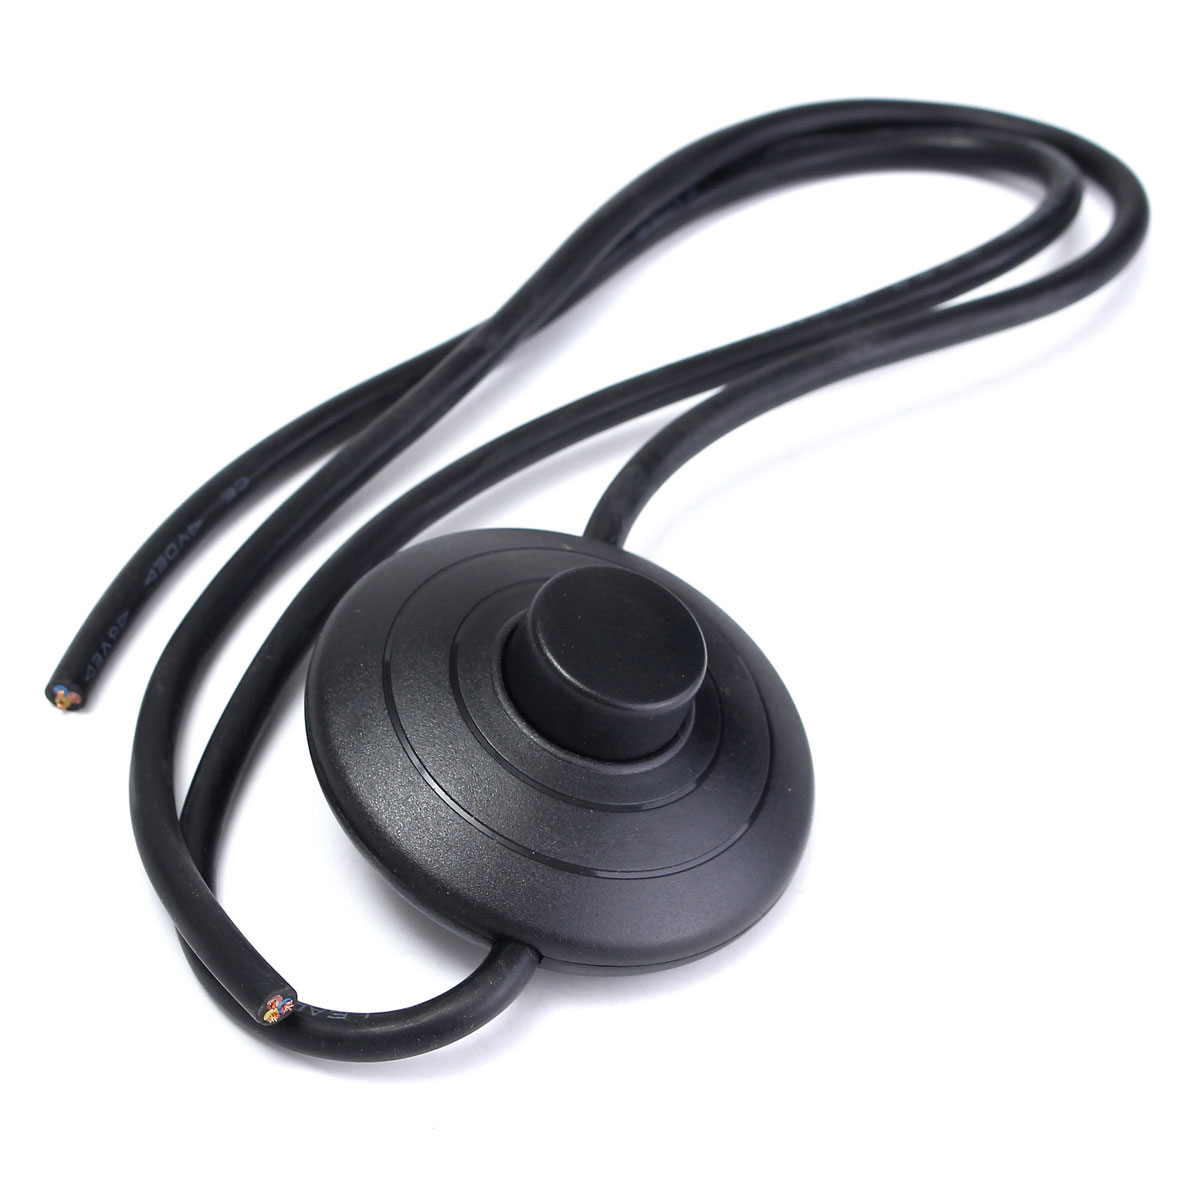 1M-Circular-Lighting-Button-Switch-with-3-Core-Inline-Flex-Cord-for-Table-Desk-Lamp-1271121-5